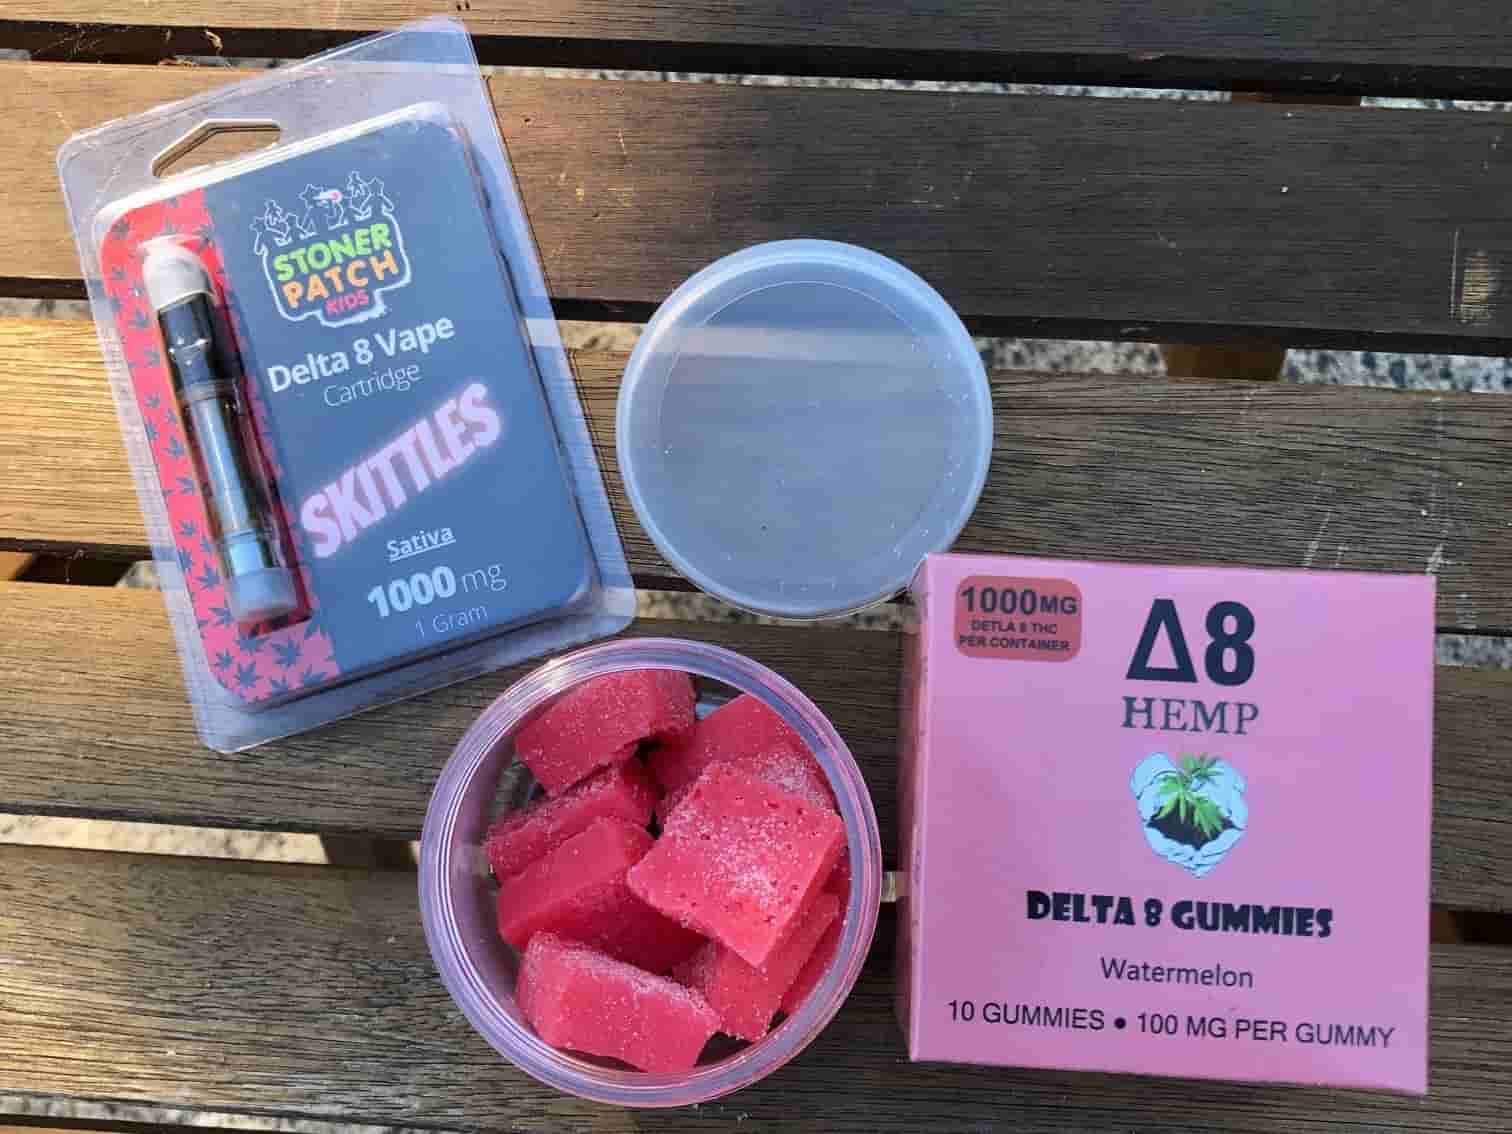 IS DELTA-8 LEGAL IN KENTUCKY - Gummies|Thc|Products|Hemp|Product|Brand|Effects|Delta|Gummy|Cbd|Origin|Quality|Dosage|Delta-8|Dose|Usasource|Flavors|Brands|Ingredients|Range|Customers|Edibles|Cartridges|Reviews|Side|List|Health|Cannabis|Lab|Customer|Options|Benefits|Overviewproducts|Research|Time|Market|Drug|Farms|Party|People|Delta-8 Thc|Delta-8 Products|Delta-9 Thc|Delta-8 Gummies|Delta-8 Thc Products|Delta-8 Brands|Customer Reviews|Brand Overviewproducts|Drug Tests|Free Shipping|Similar Benefits|Vape Cartridges|Hemp Doctor|United States|Third Party Lab|Drug Test|Thc Edibles|Health Canada|Cannabis Plant|Side Effects|Organic Hemp|Diamond Cbd|Reaction Time|Legal Hemp|Psychoactive Effects|Psychoactive Properties|Third Party|Dry Eyes|Delta-8 Market|Tolerance Level